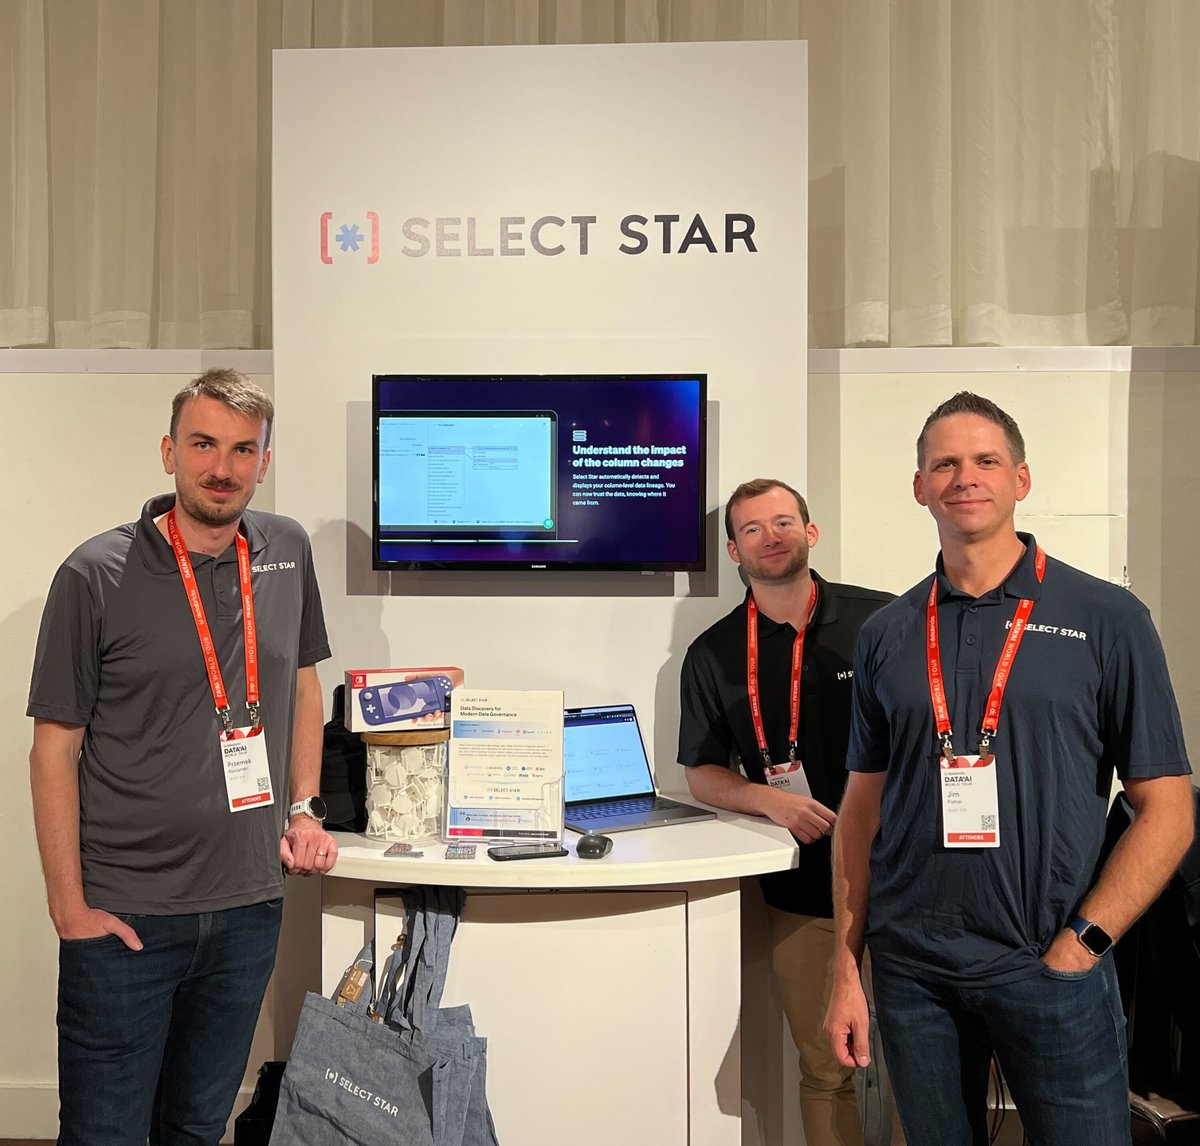 The Select Star team is in The Big Apple 🍎 today for #dataaiworldtour! Stop by our booth for a demo with the best of the bunch and see the latest and greatest! While you're there, make sure to take a guess at home many tables are in our database. Closest guess wins a Switch 🏆